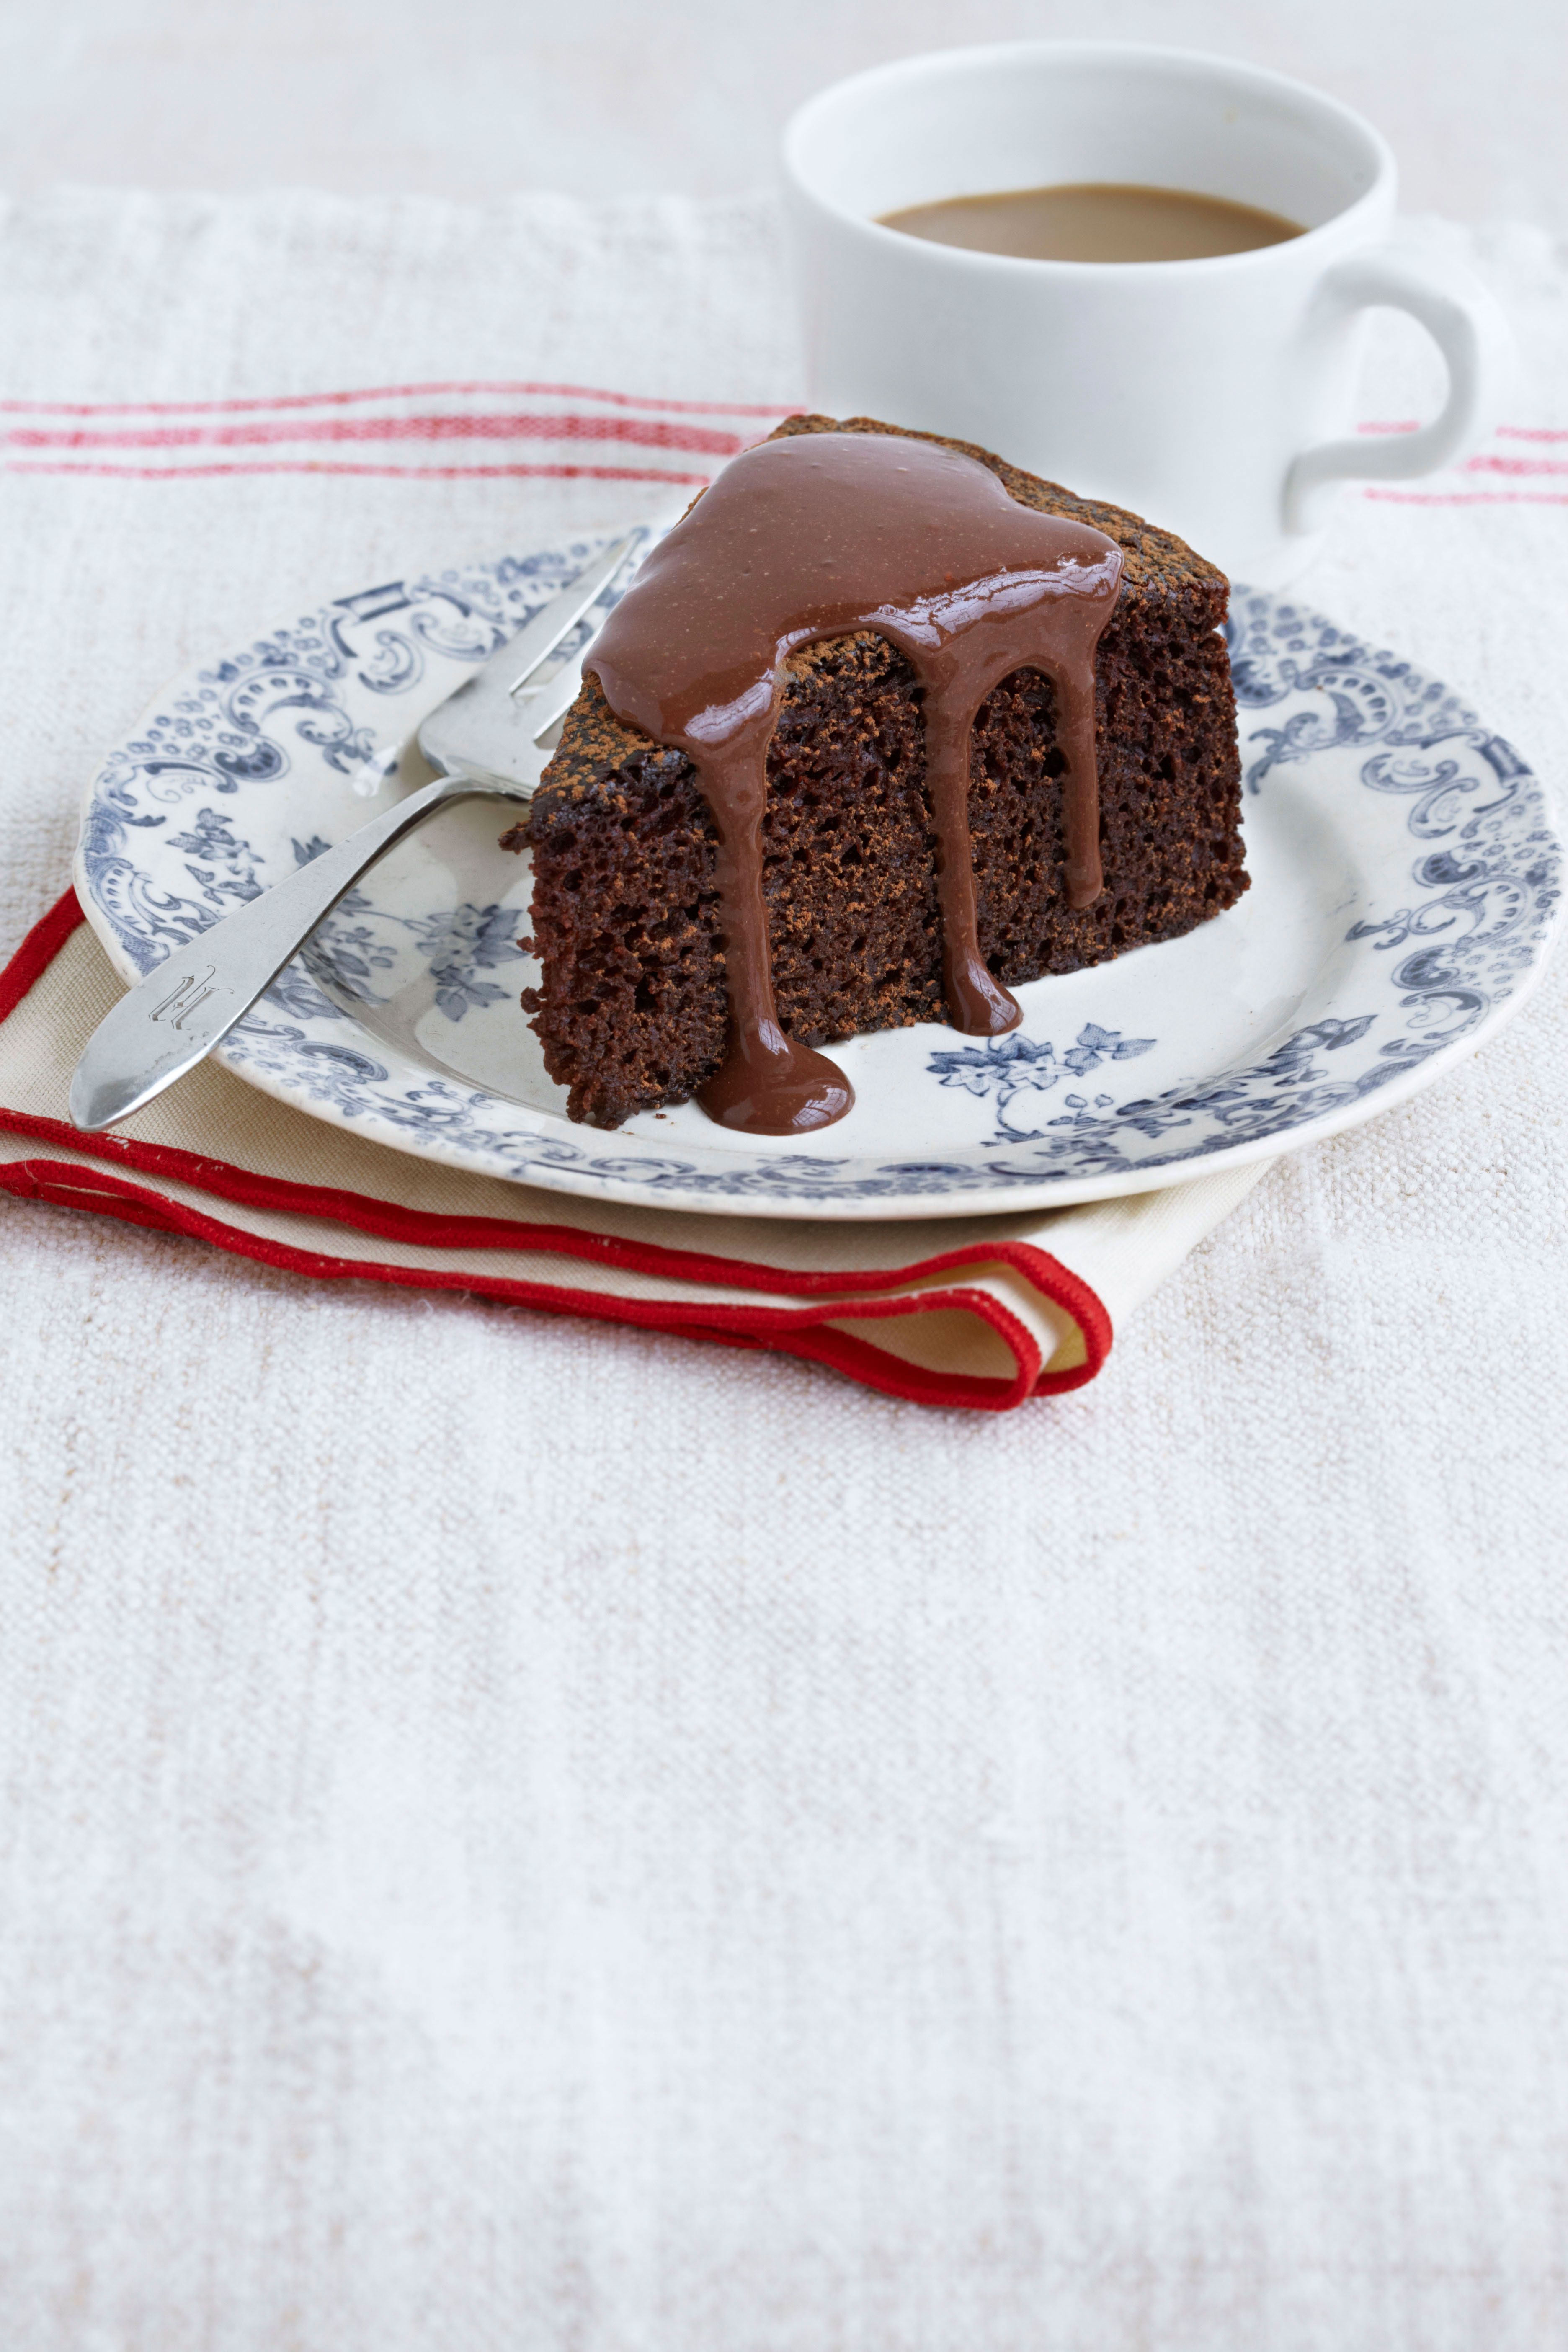 Chocolate cake with caramel icing and fudge sauce | Woolworths TASTE